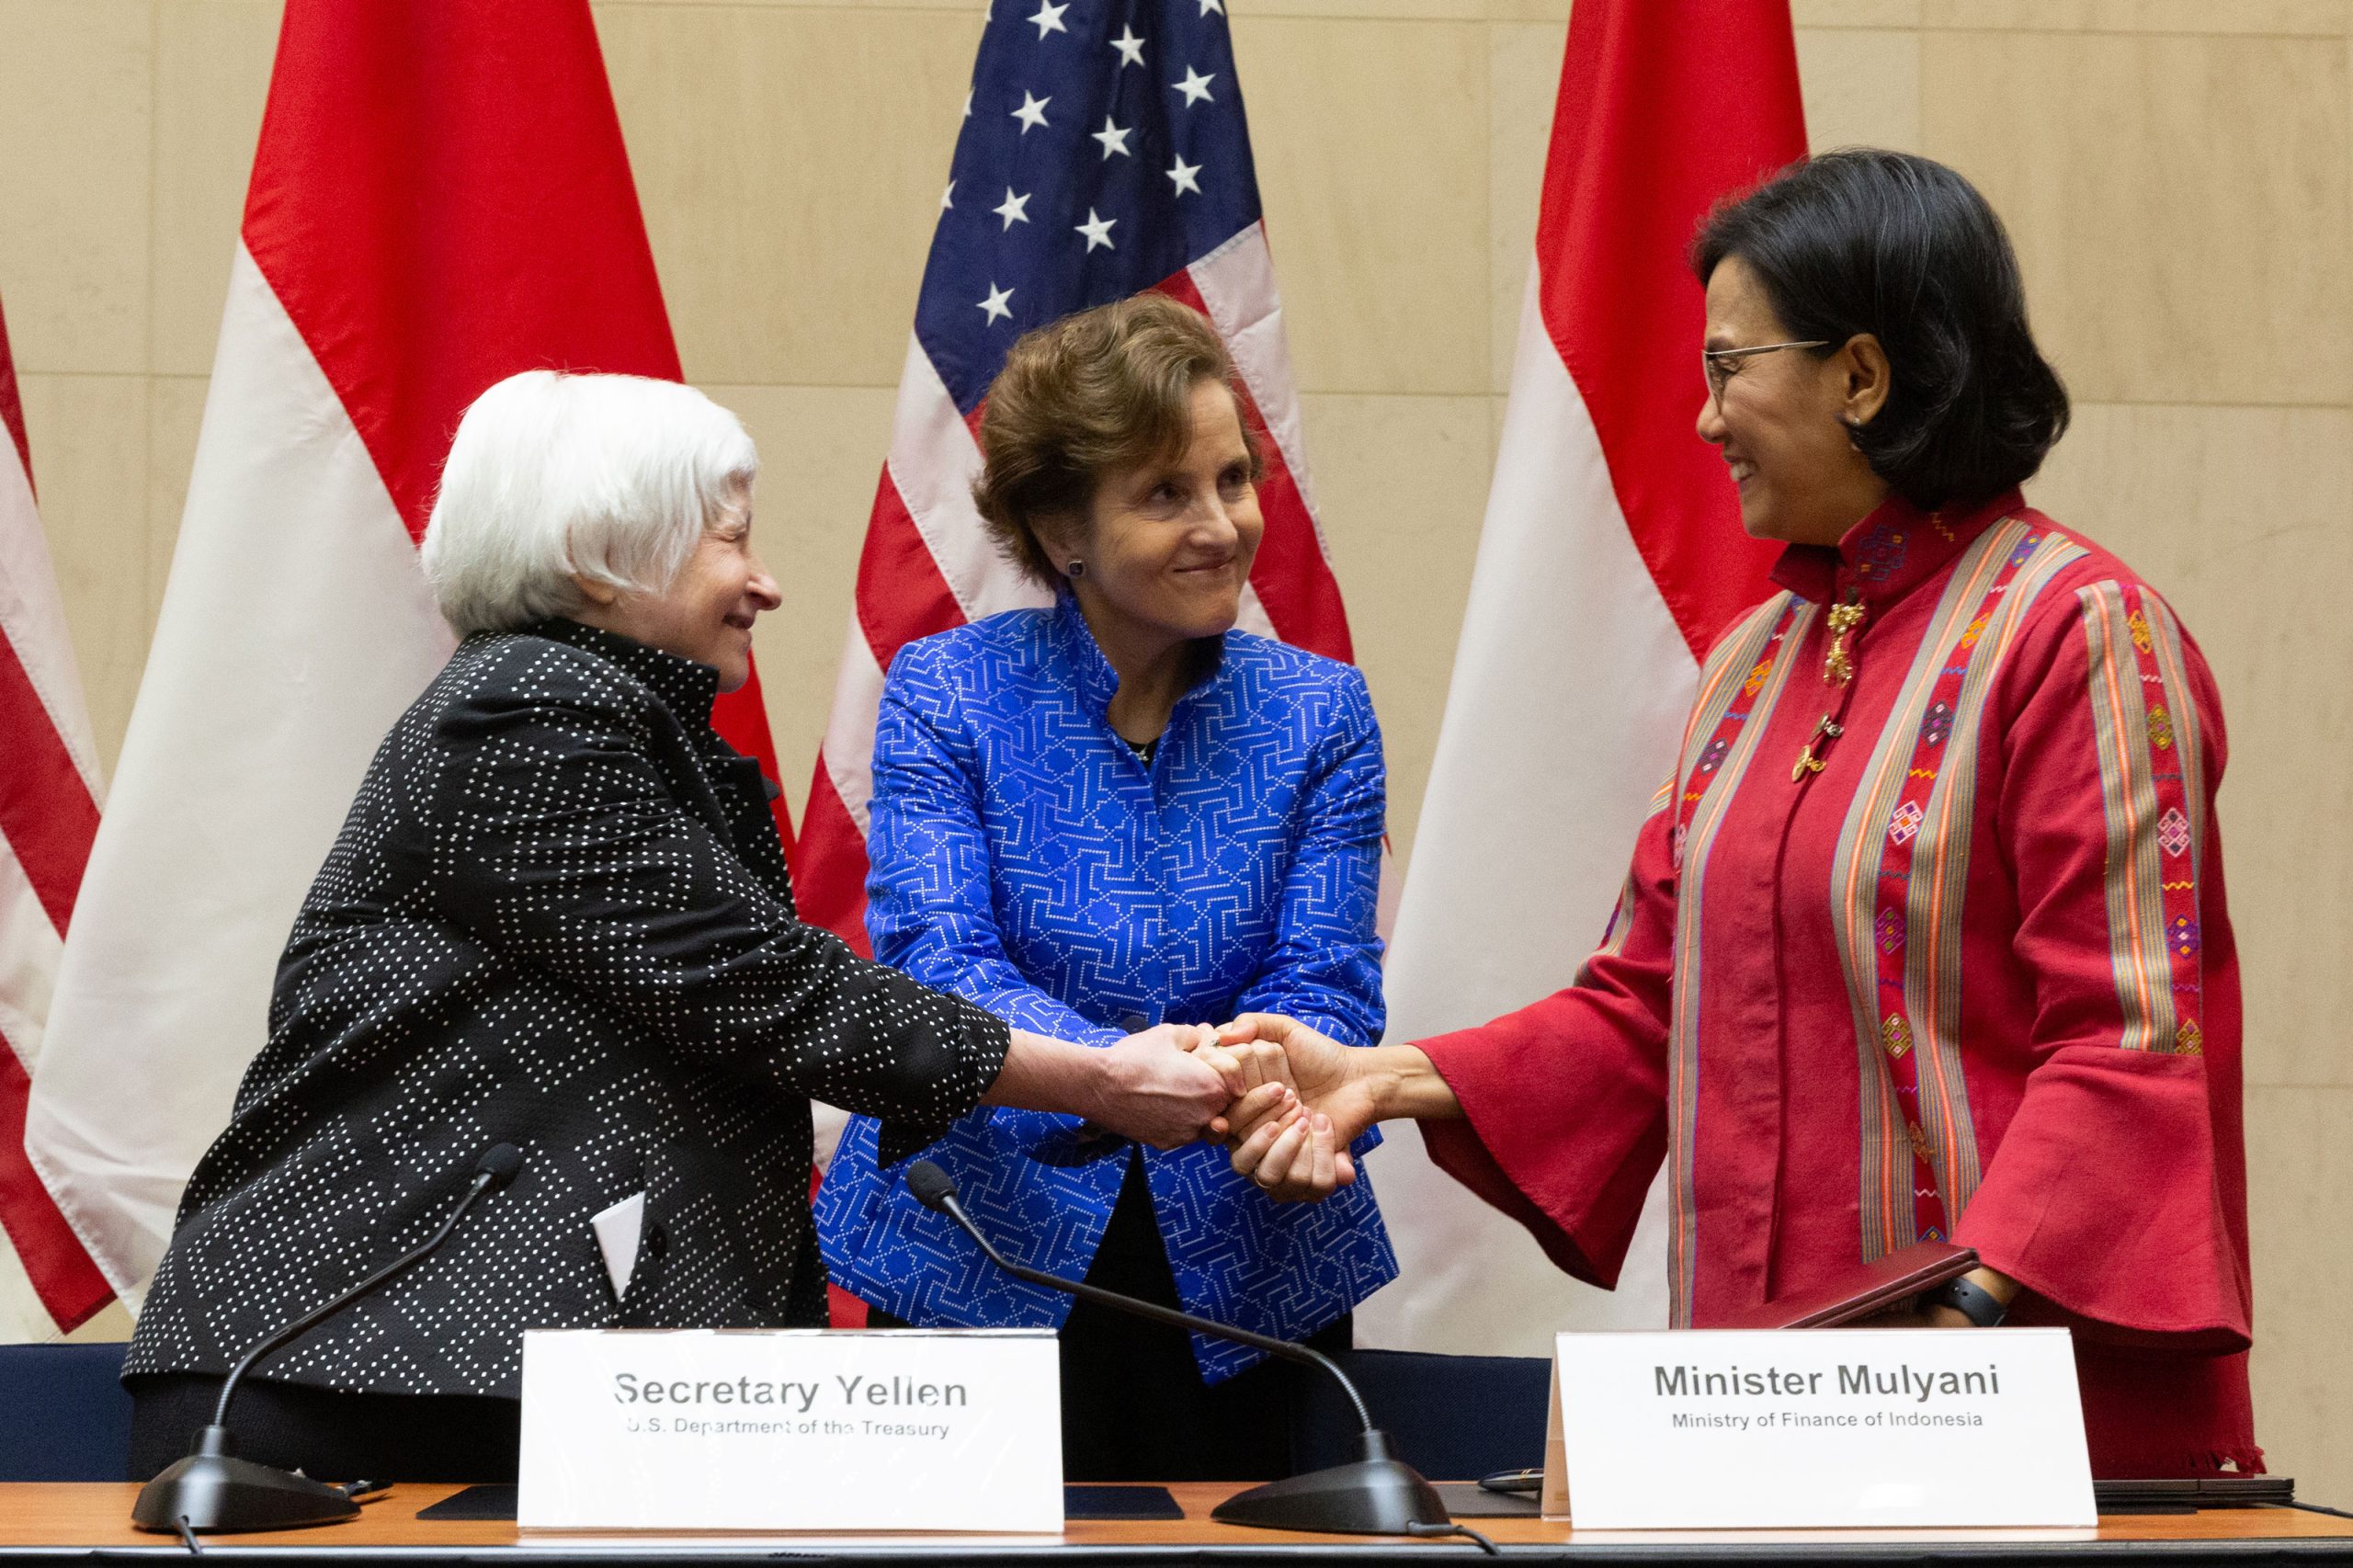 U.S. Secretary of the Treasury Janet Yellen and Indonesian Minister of Finance Sri Mulyani Indrawati signed the $649 million Indonesia Infrastructure and Finance Compact – a five-year grant between the U.S. government’s Millennium Challenge Corporation (MCC) and the Government of Indonesia.